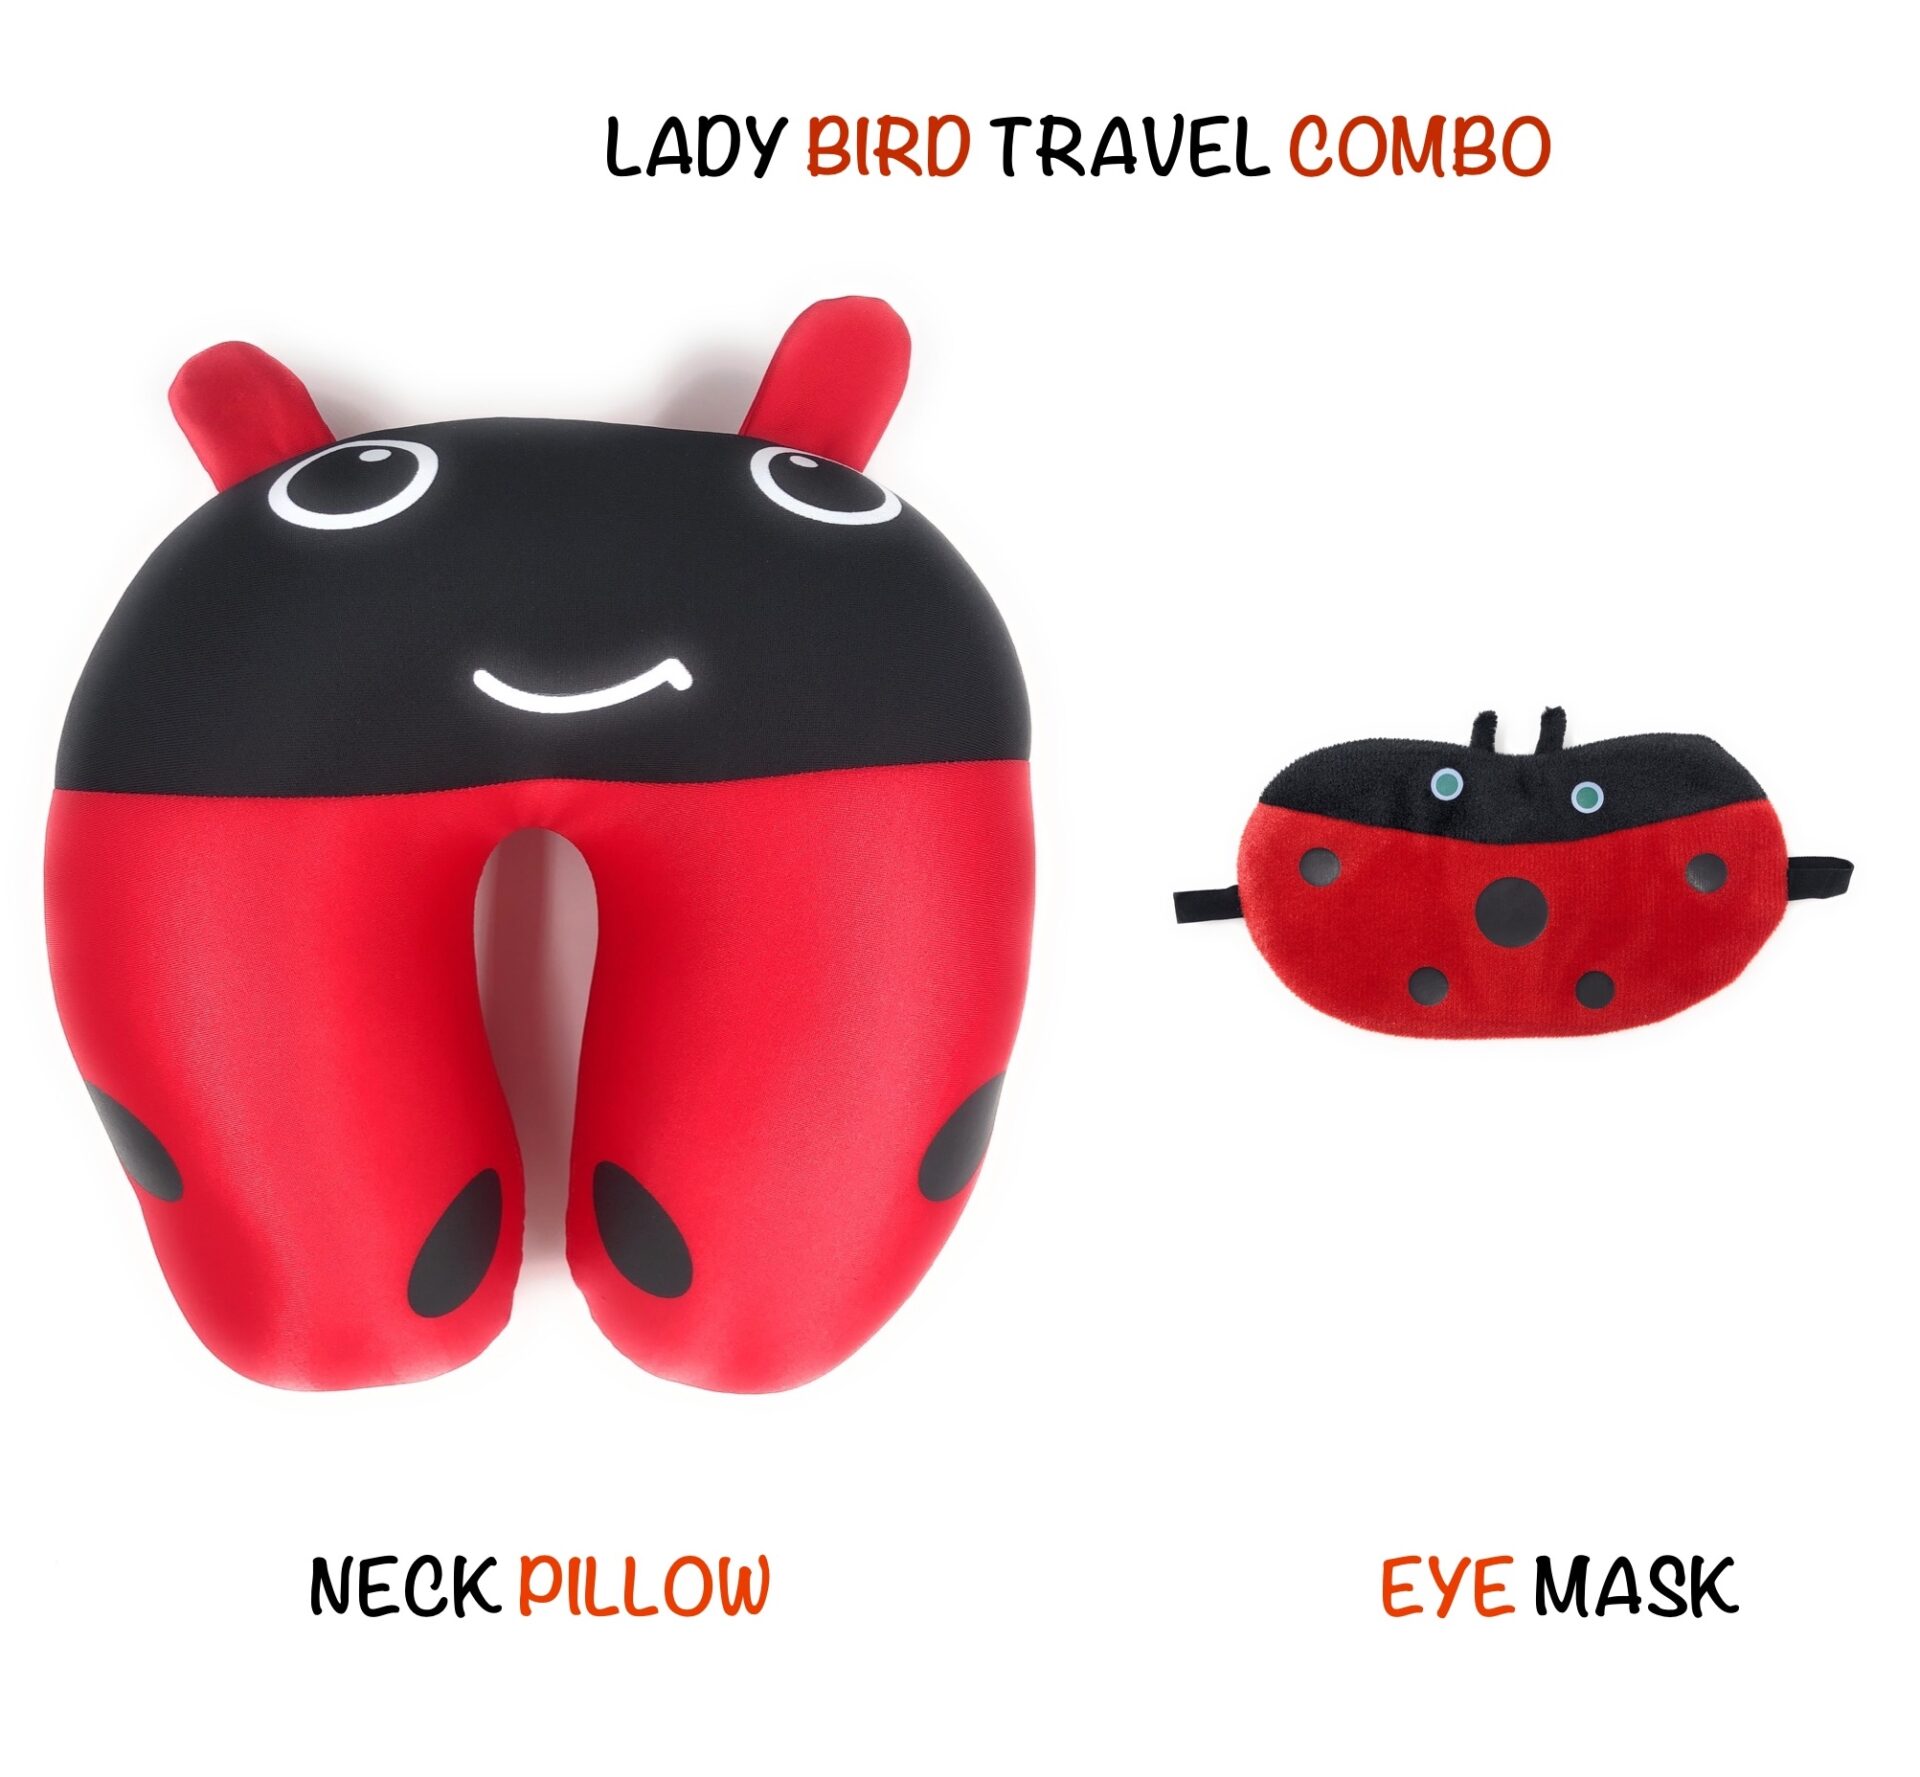 Soft Chin Neck Support Comfortable Adjustible Memory Foam Best for Sleeping Bus Airplane Car TV Reading Computer Kids Adults Carry-On Luggage Travel Pillow 